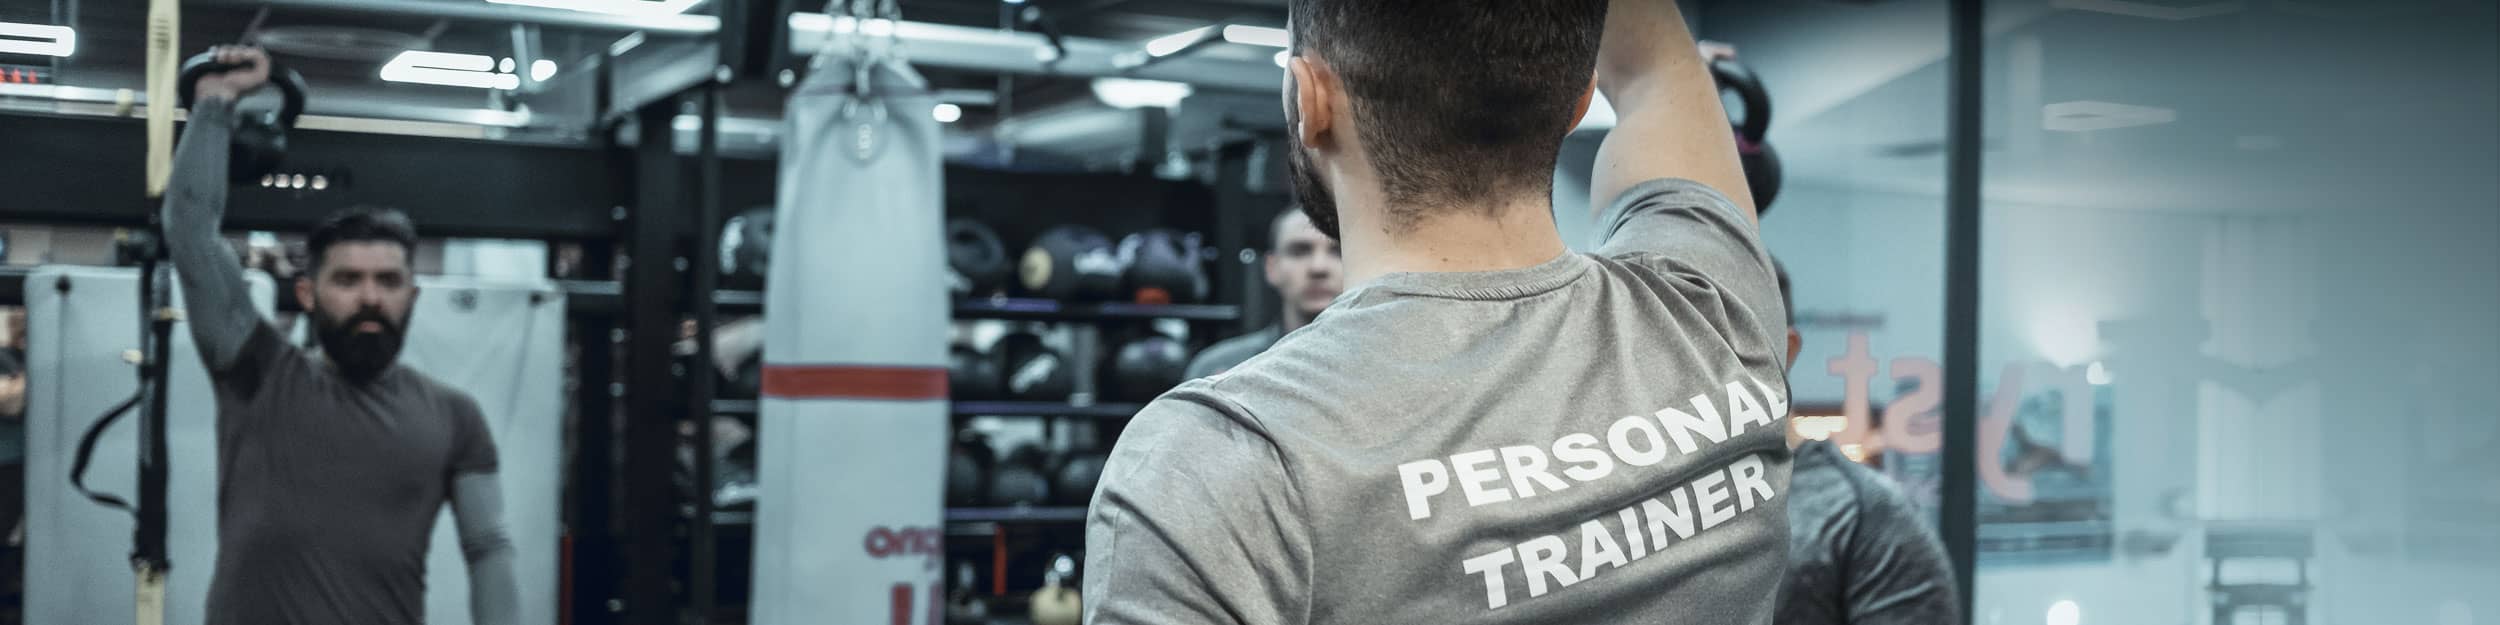 Personal Trainer supporting men working out in a gym